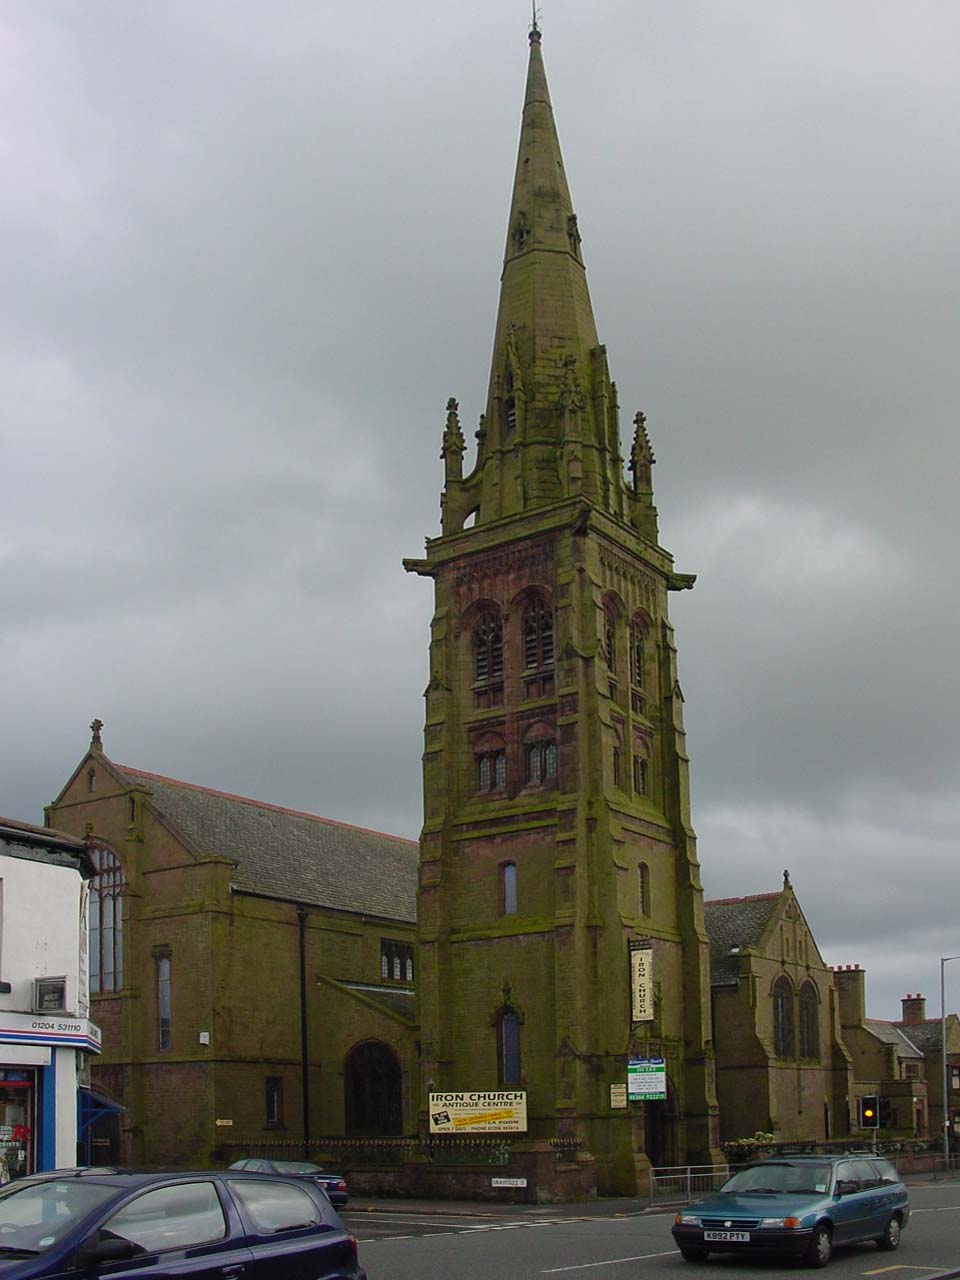 The Spire on Blackburn Rd Congregational Church, known as the Iron Church